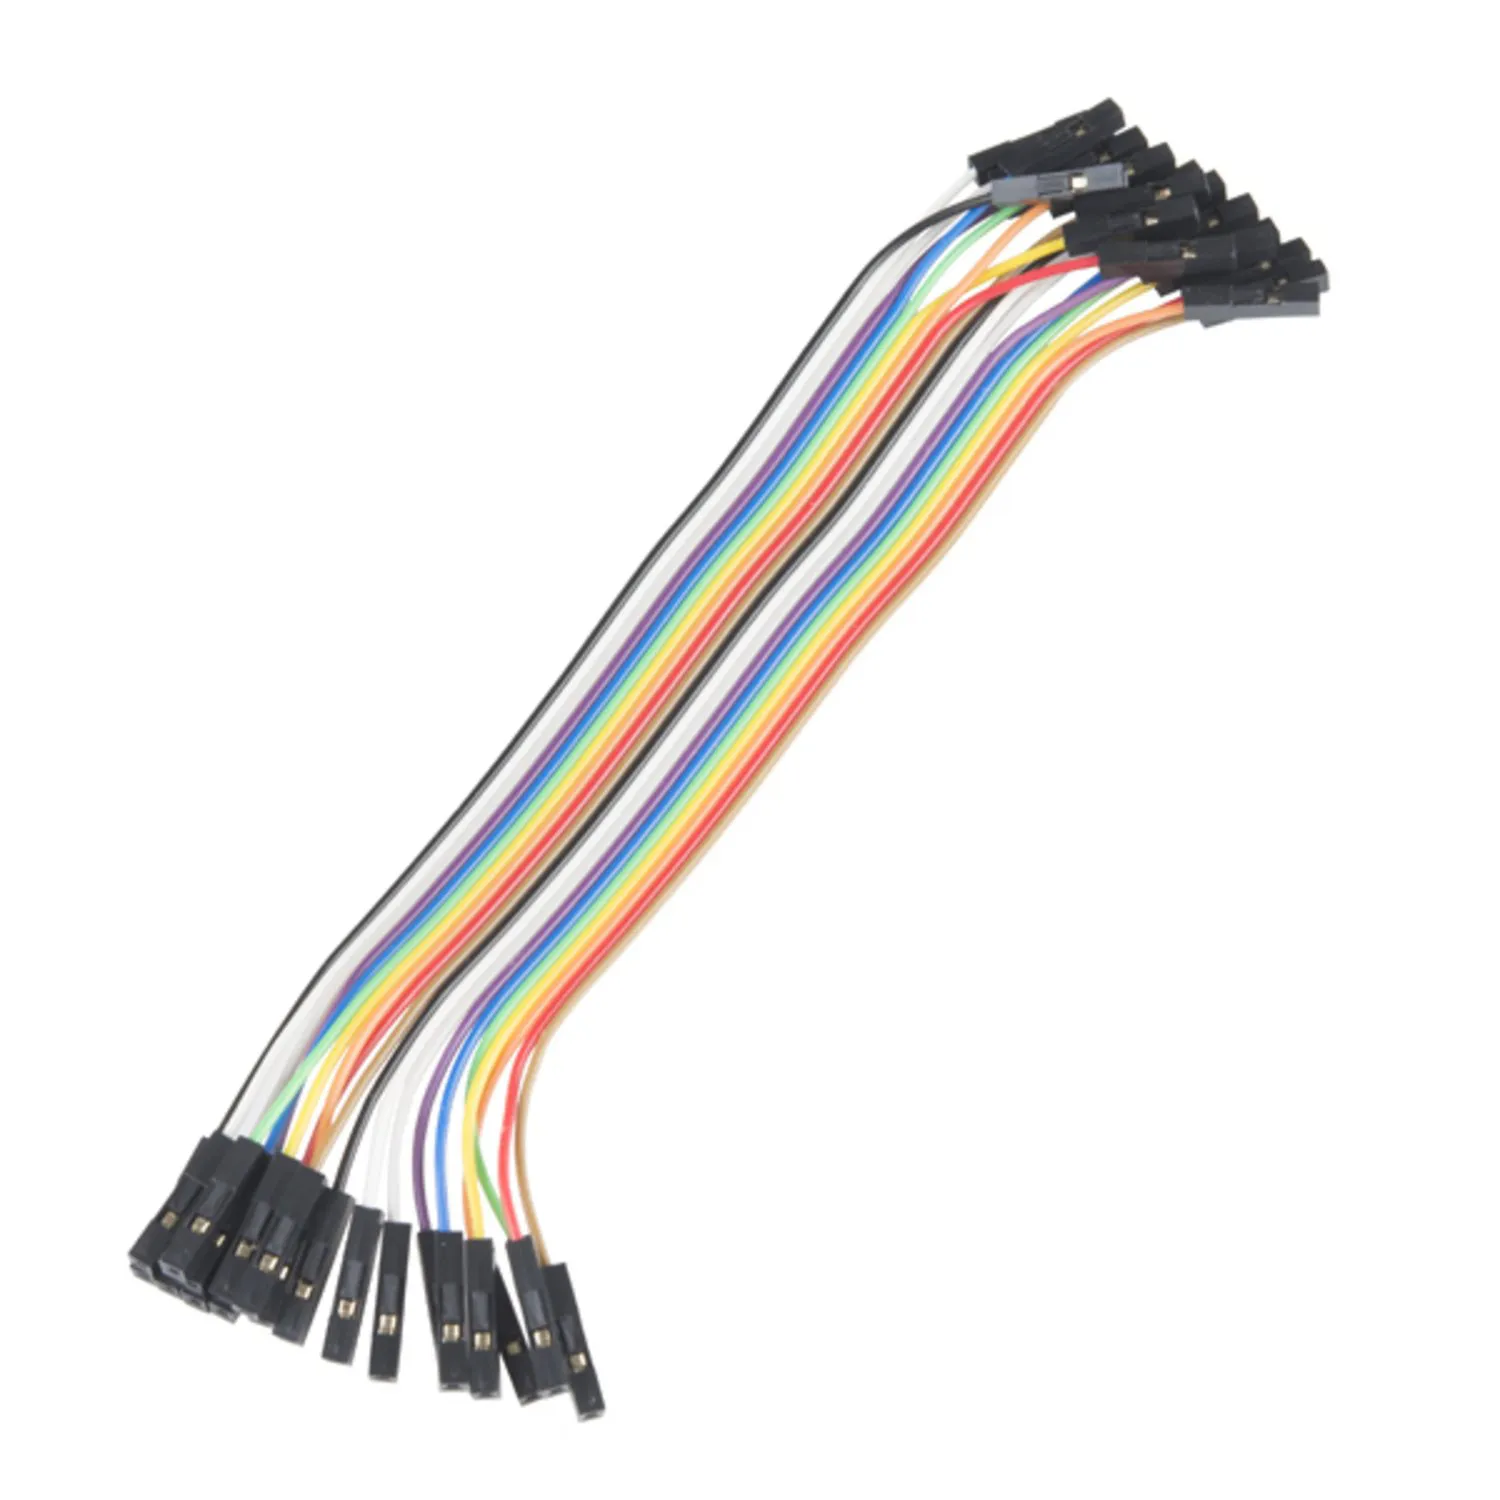 Photo of Jumper Wires - Connected 6 (F/F, 20 pack)